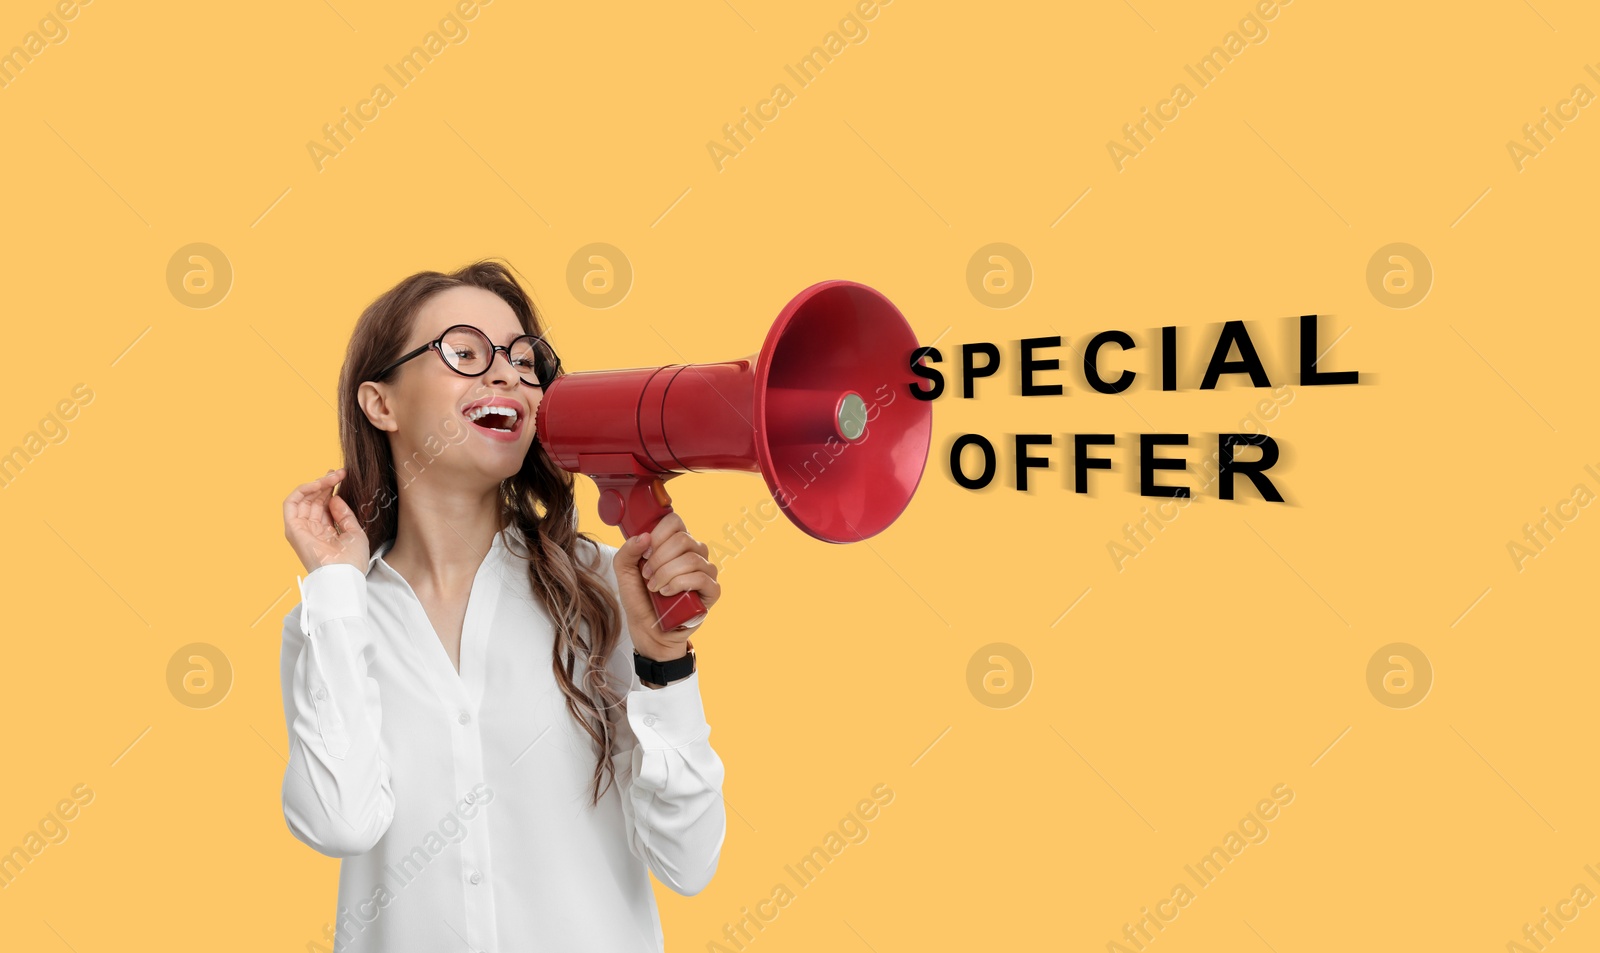 Image of Special offer. Young woman with megaphone on yellow background